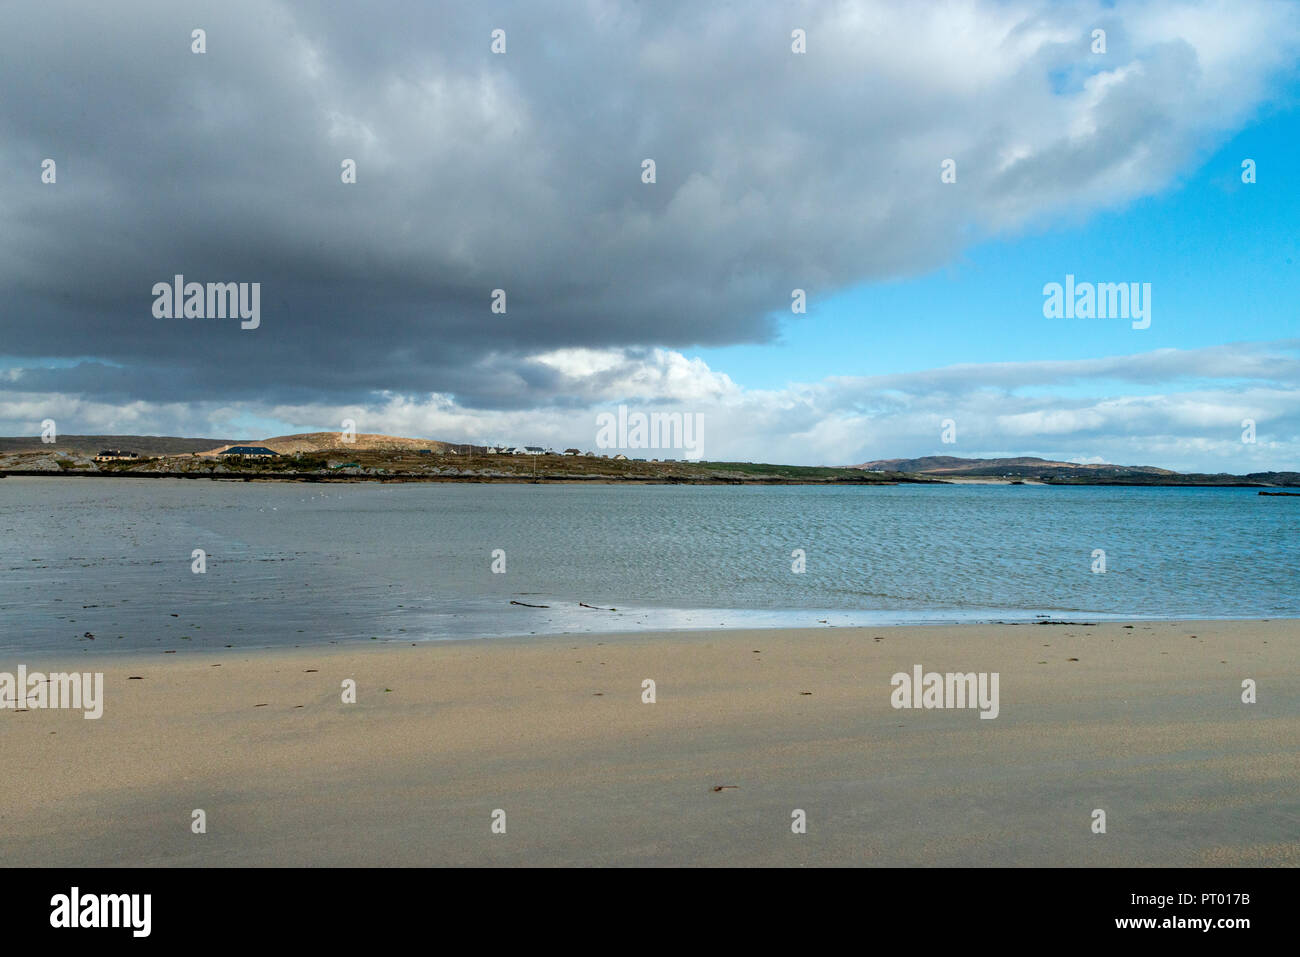 Europe, Ireland,  Connemara, Omey Island , It is possible to drive or walk across a large sandy strand to the island by following the arrowed signs. Stock Photo